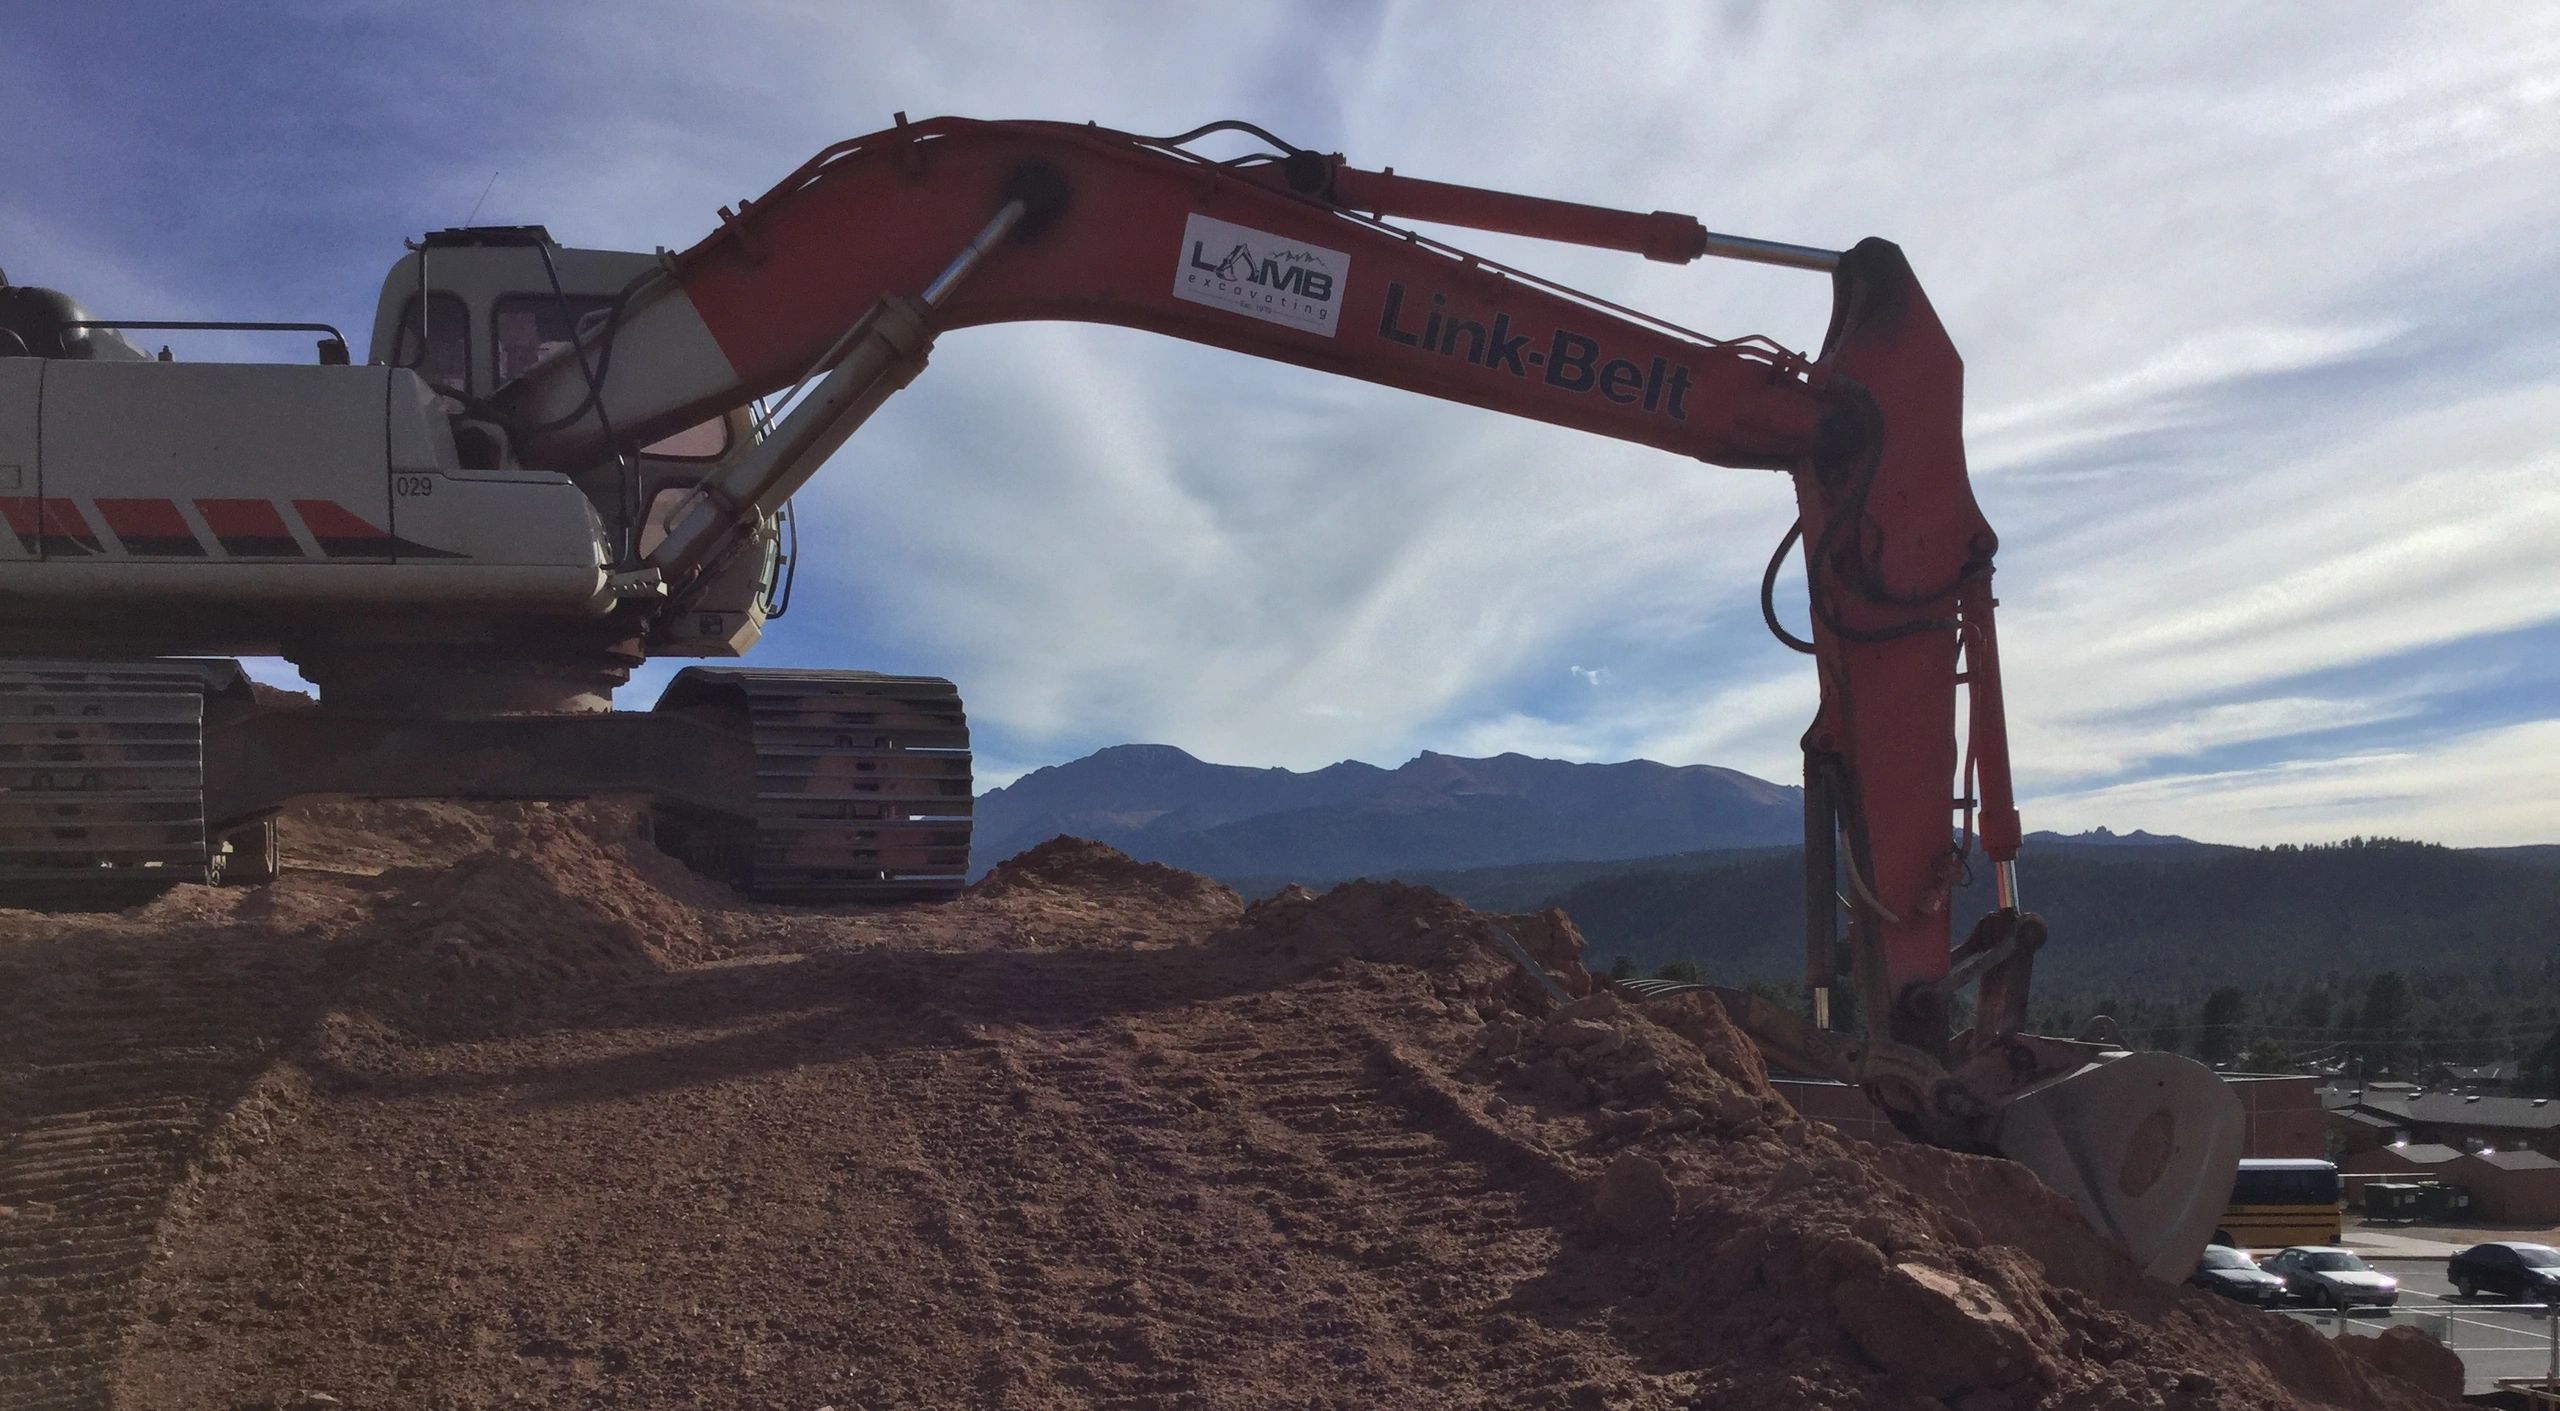 Excavation with a View of Pikes Peak - we LOVE what we do!